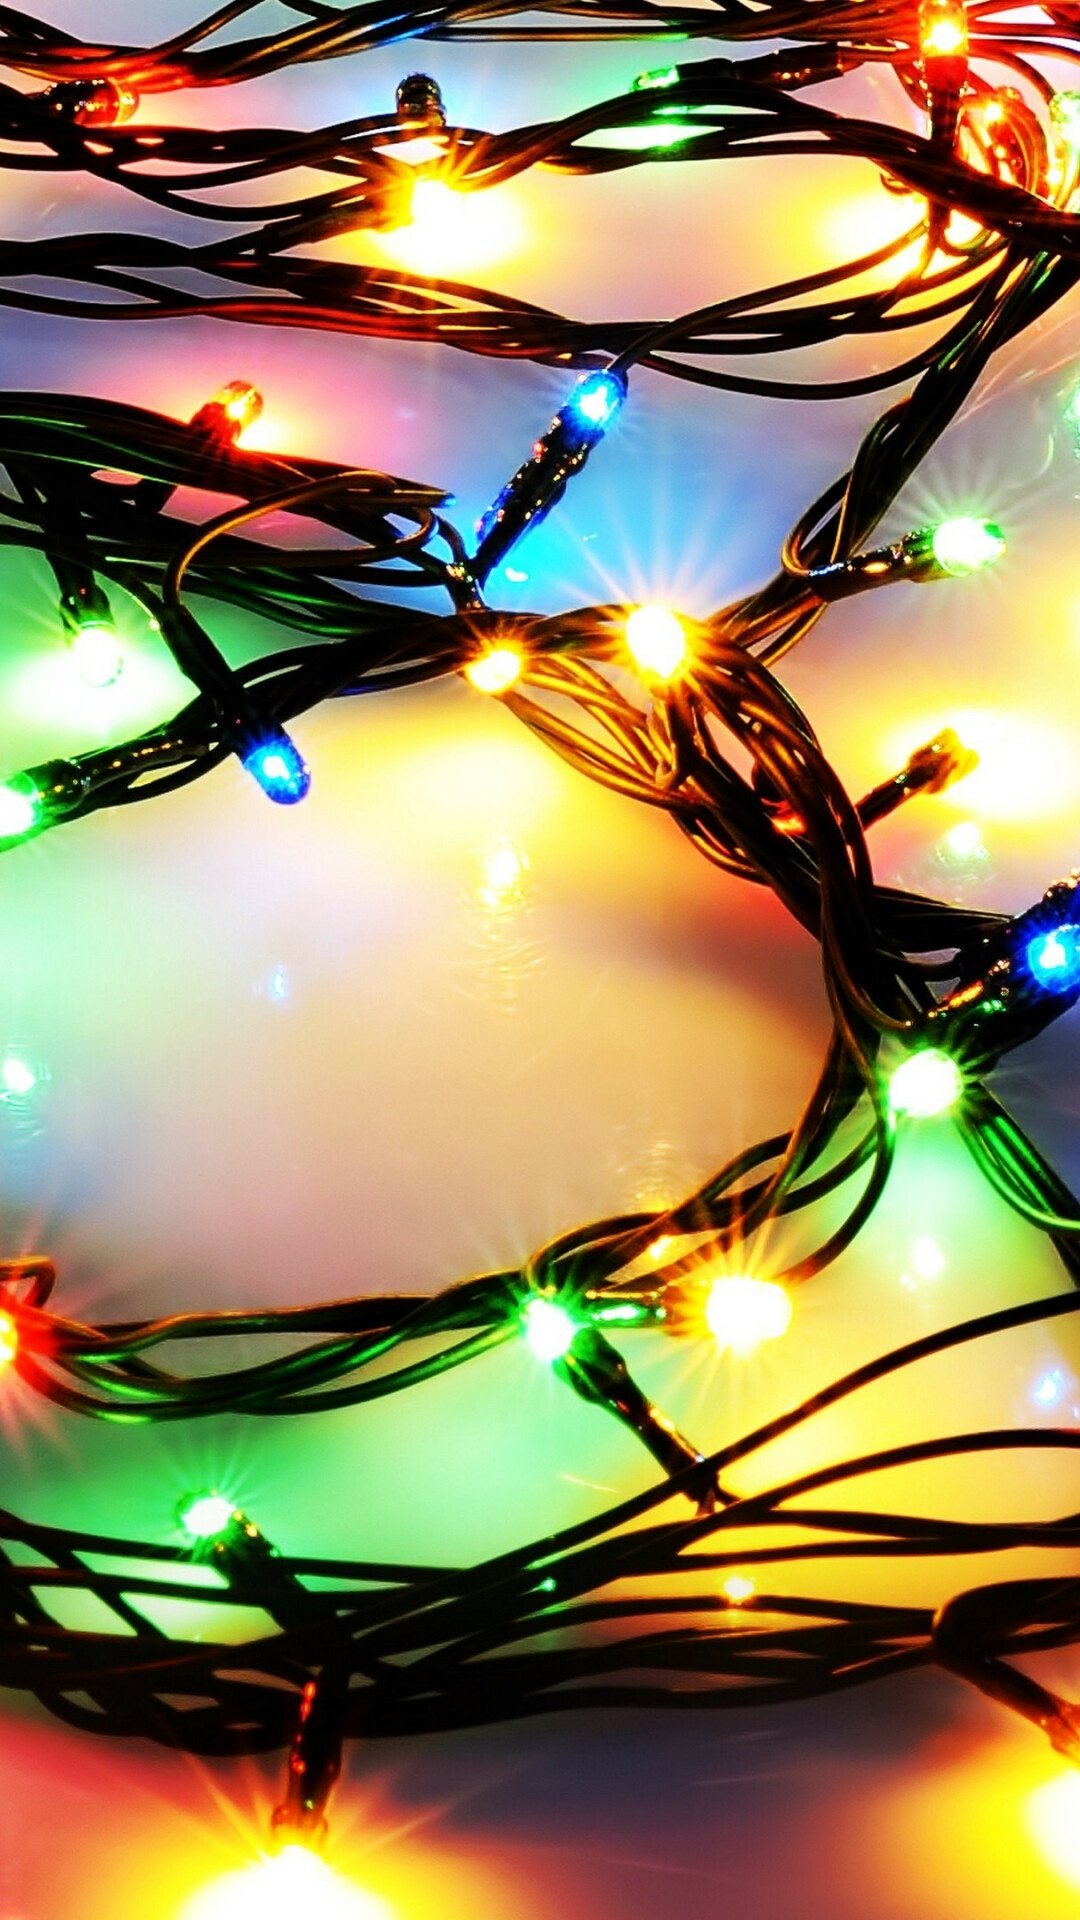 Fairy Lights: At the beginning it symbolized Jesus as the Light of the World. 1080x1920 Full HD Wallpaper.